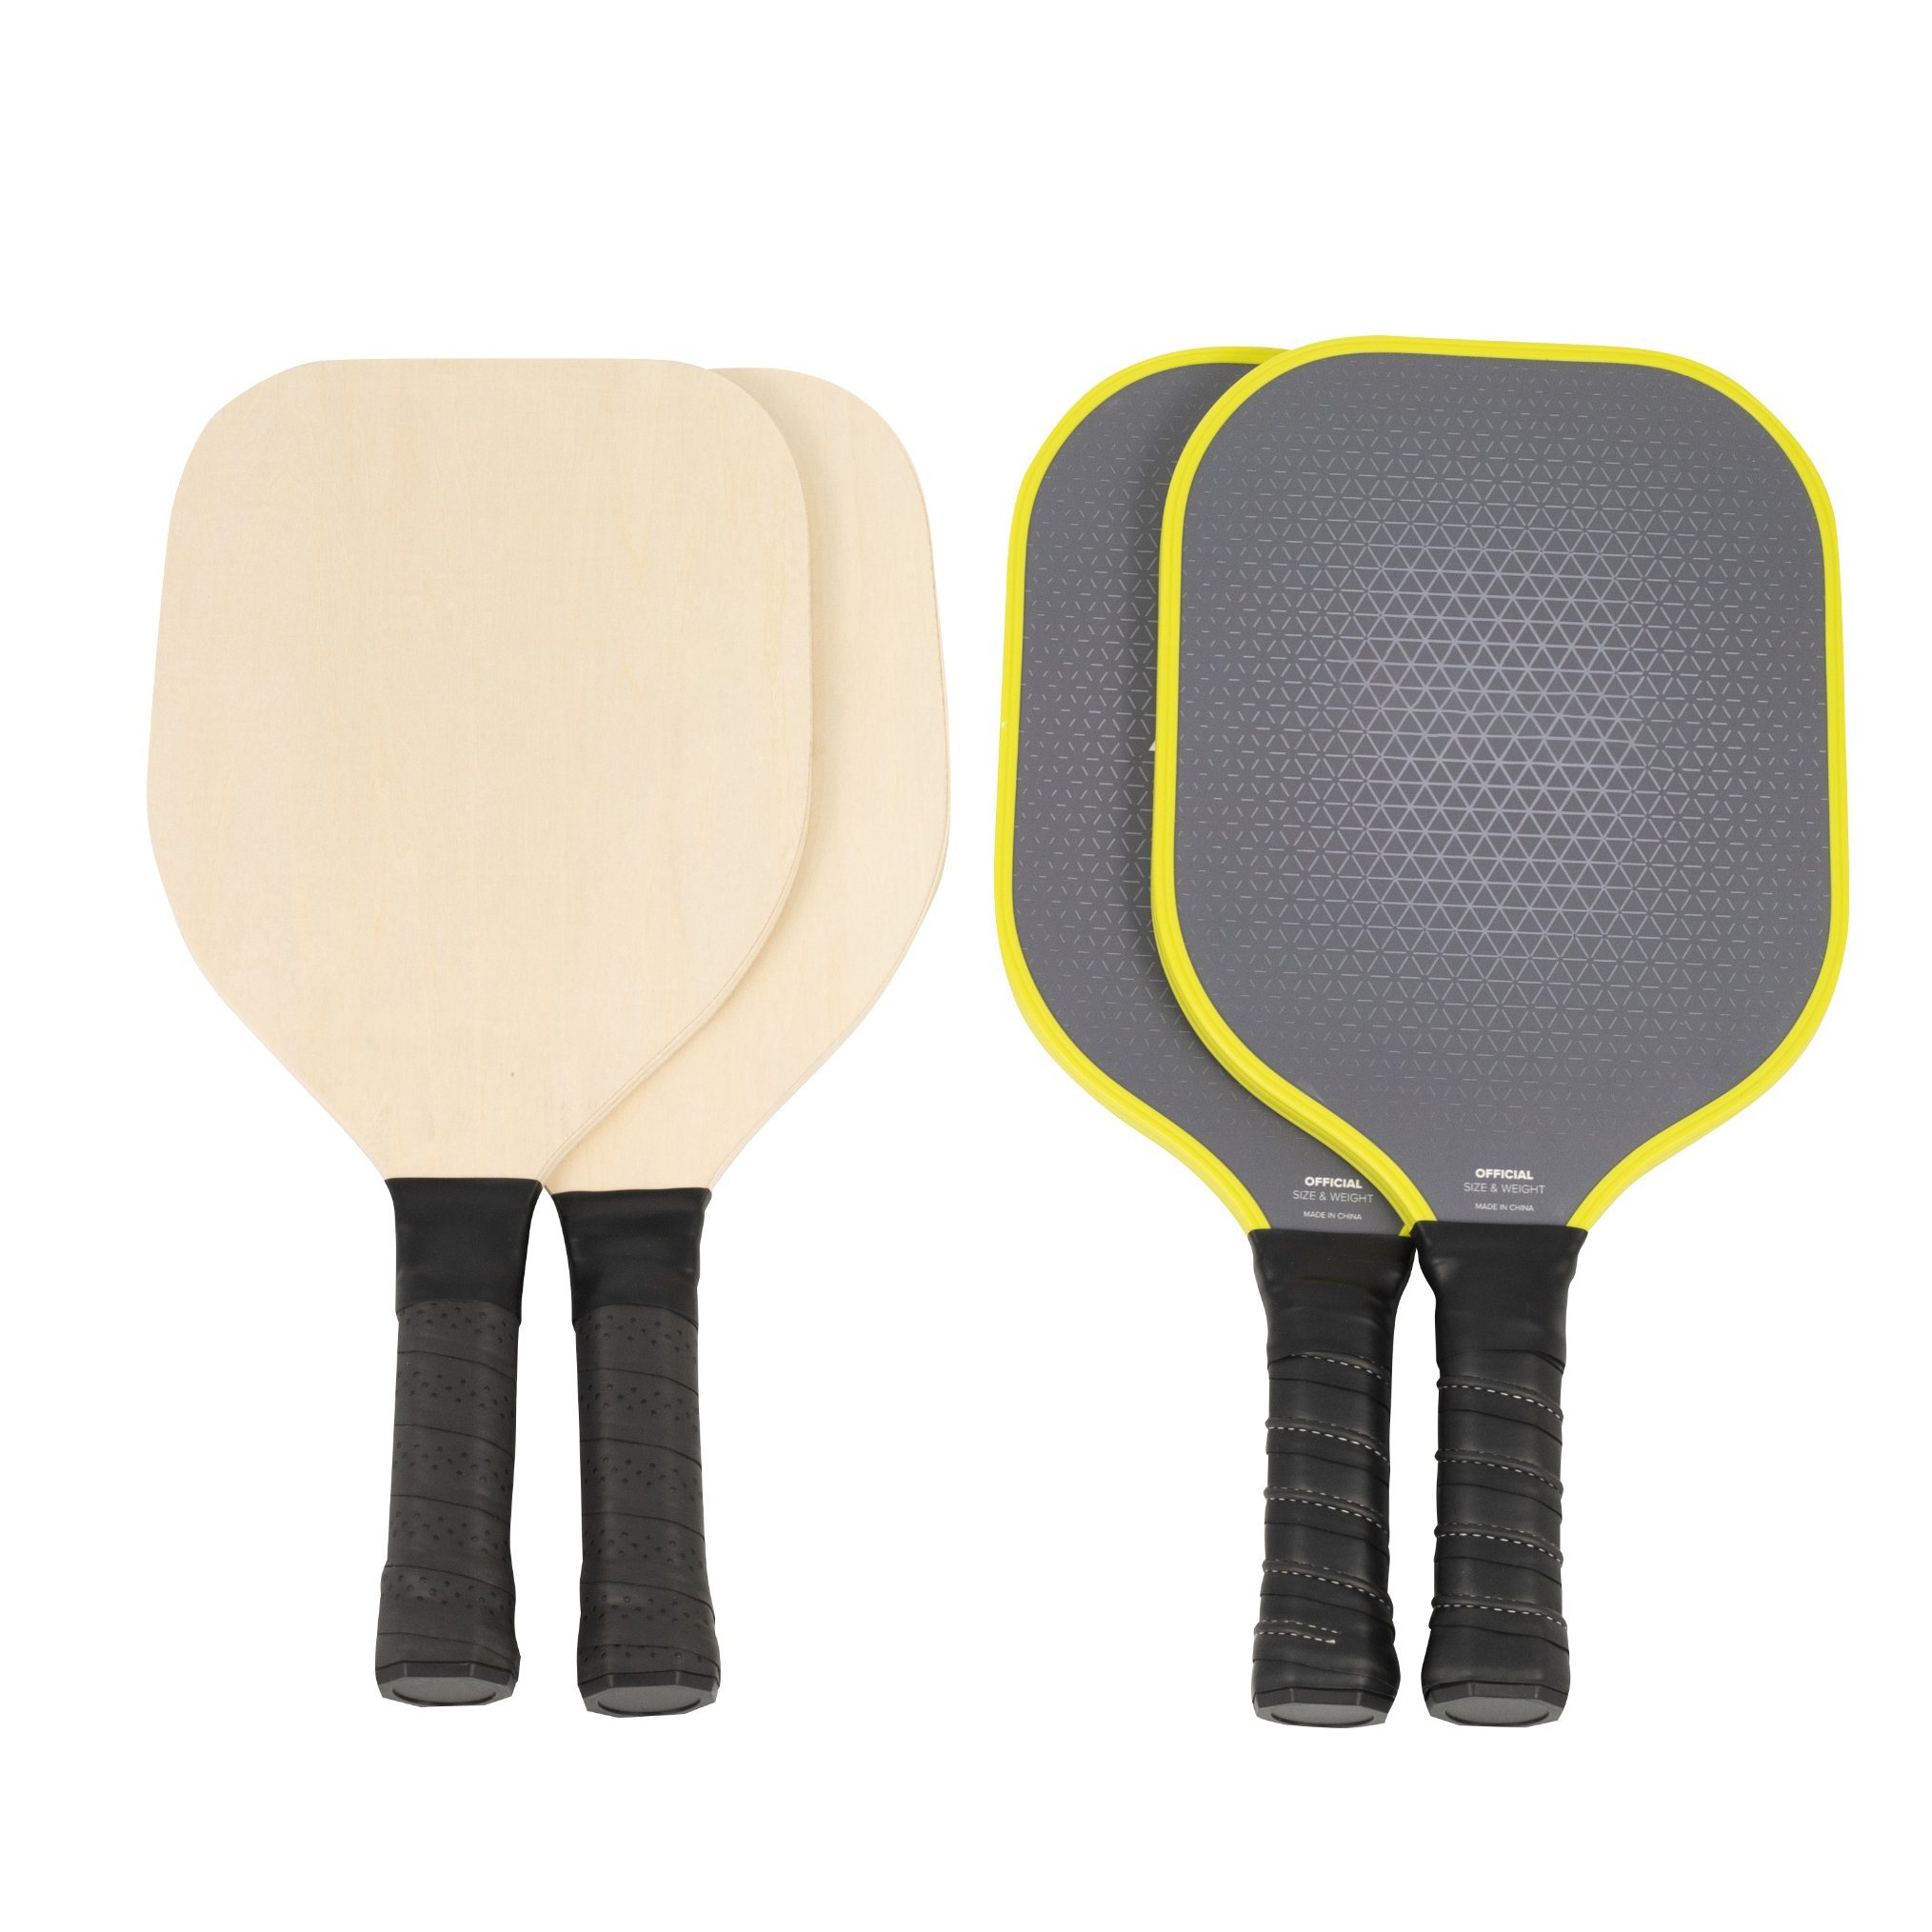 Carbon Fibre with PP Honeycomb Pickleball Paddle Usapa Approved